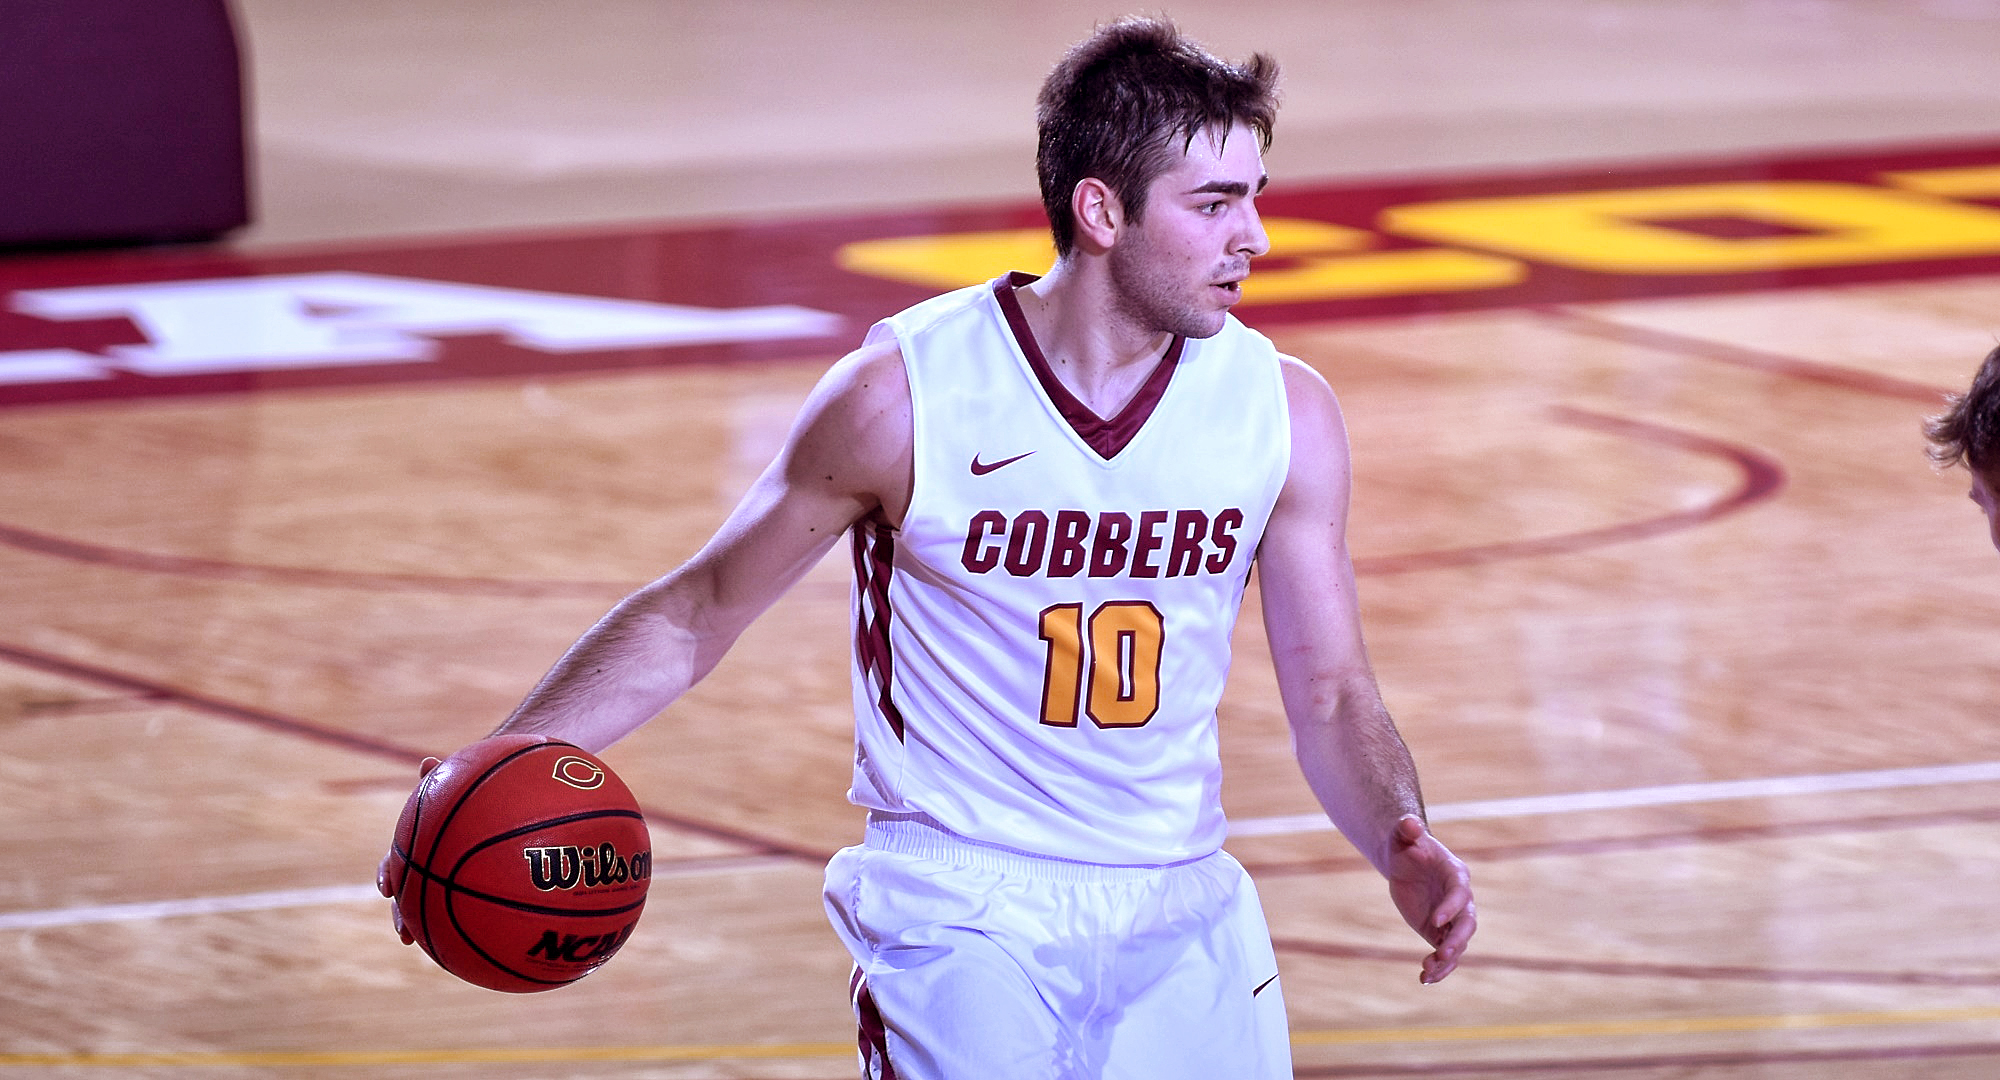 Junior Tommy Schyma put up game-high totals in points and rebounds and hit the game-winning 3-point shot in the Cobbers' victory at St. Olaf.